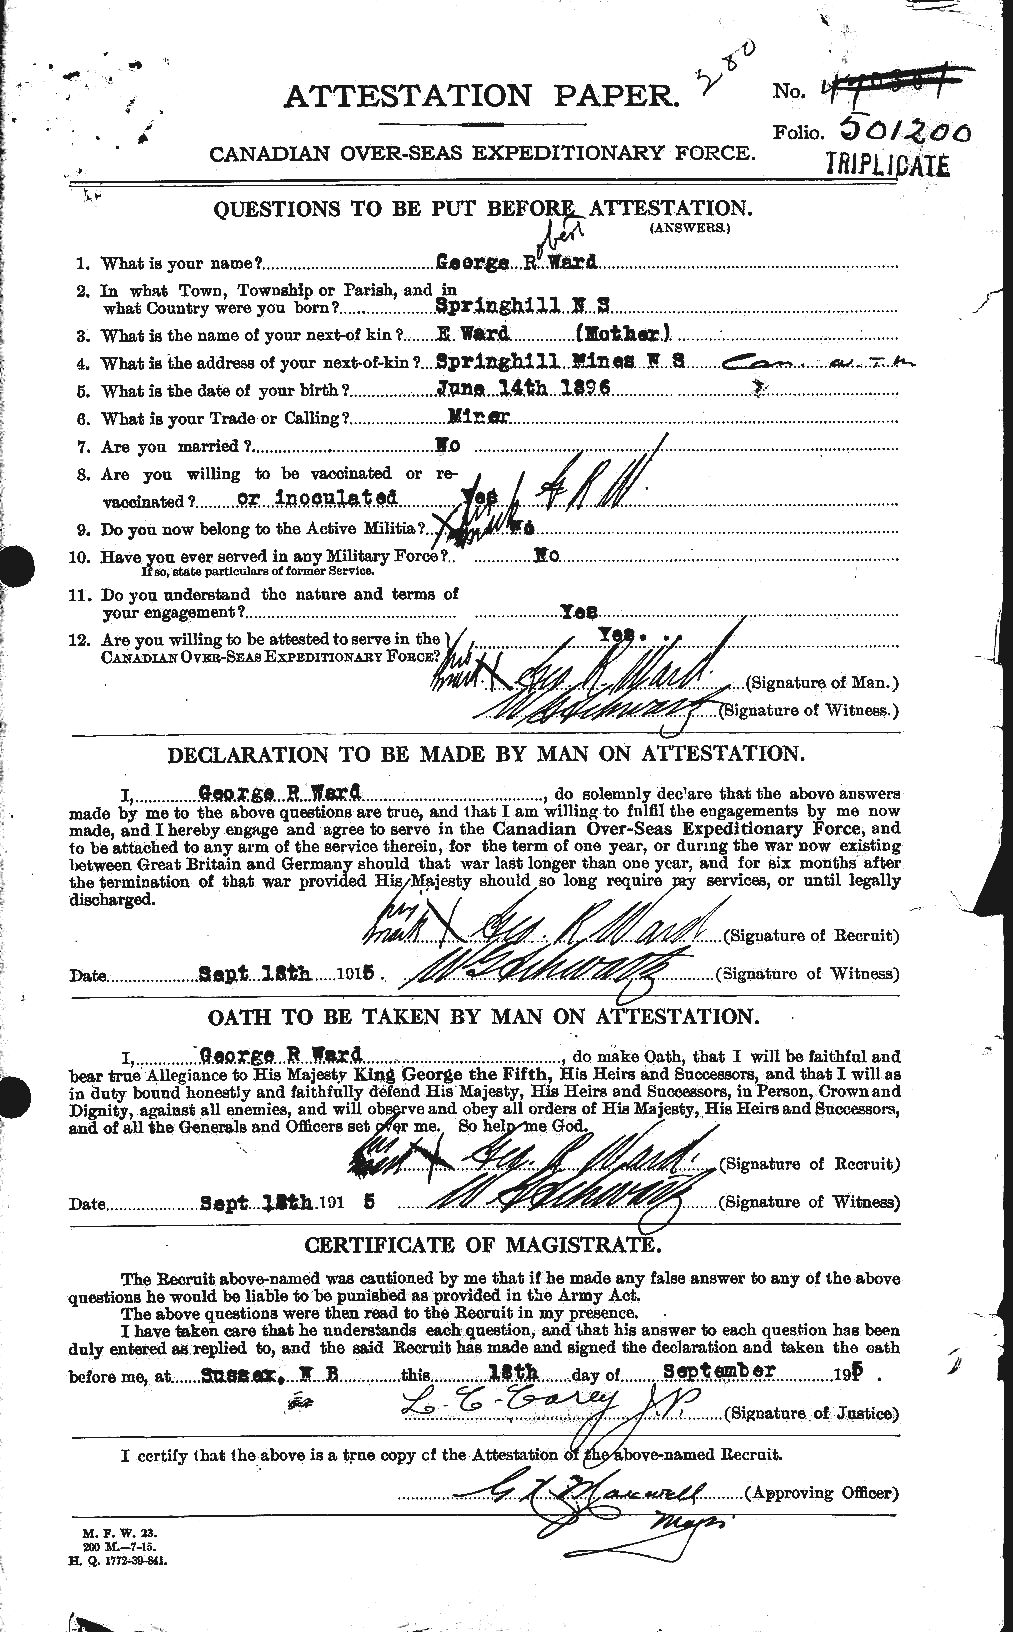 Personnel Records of the First World War - CEF 657784a